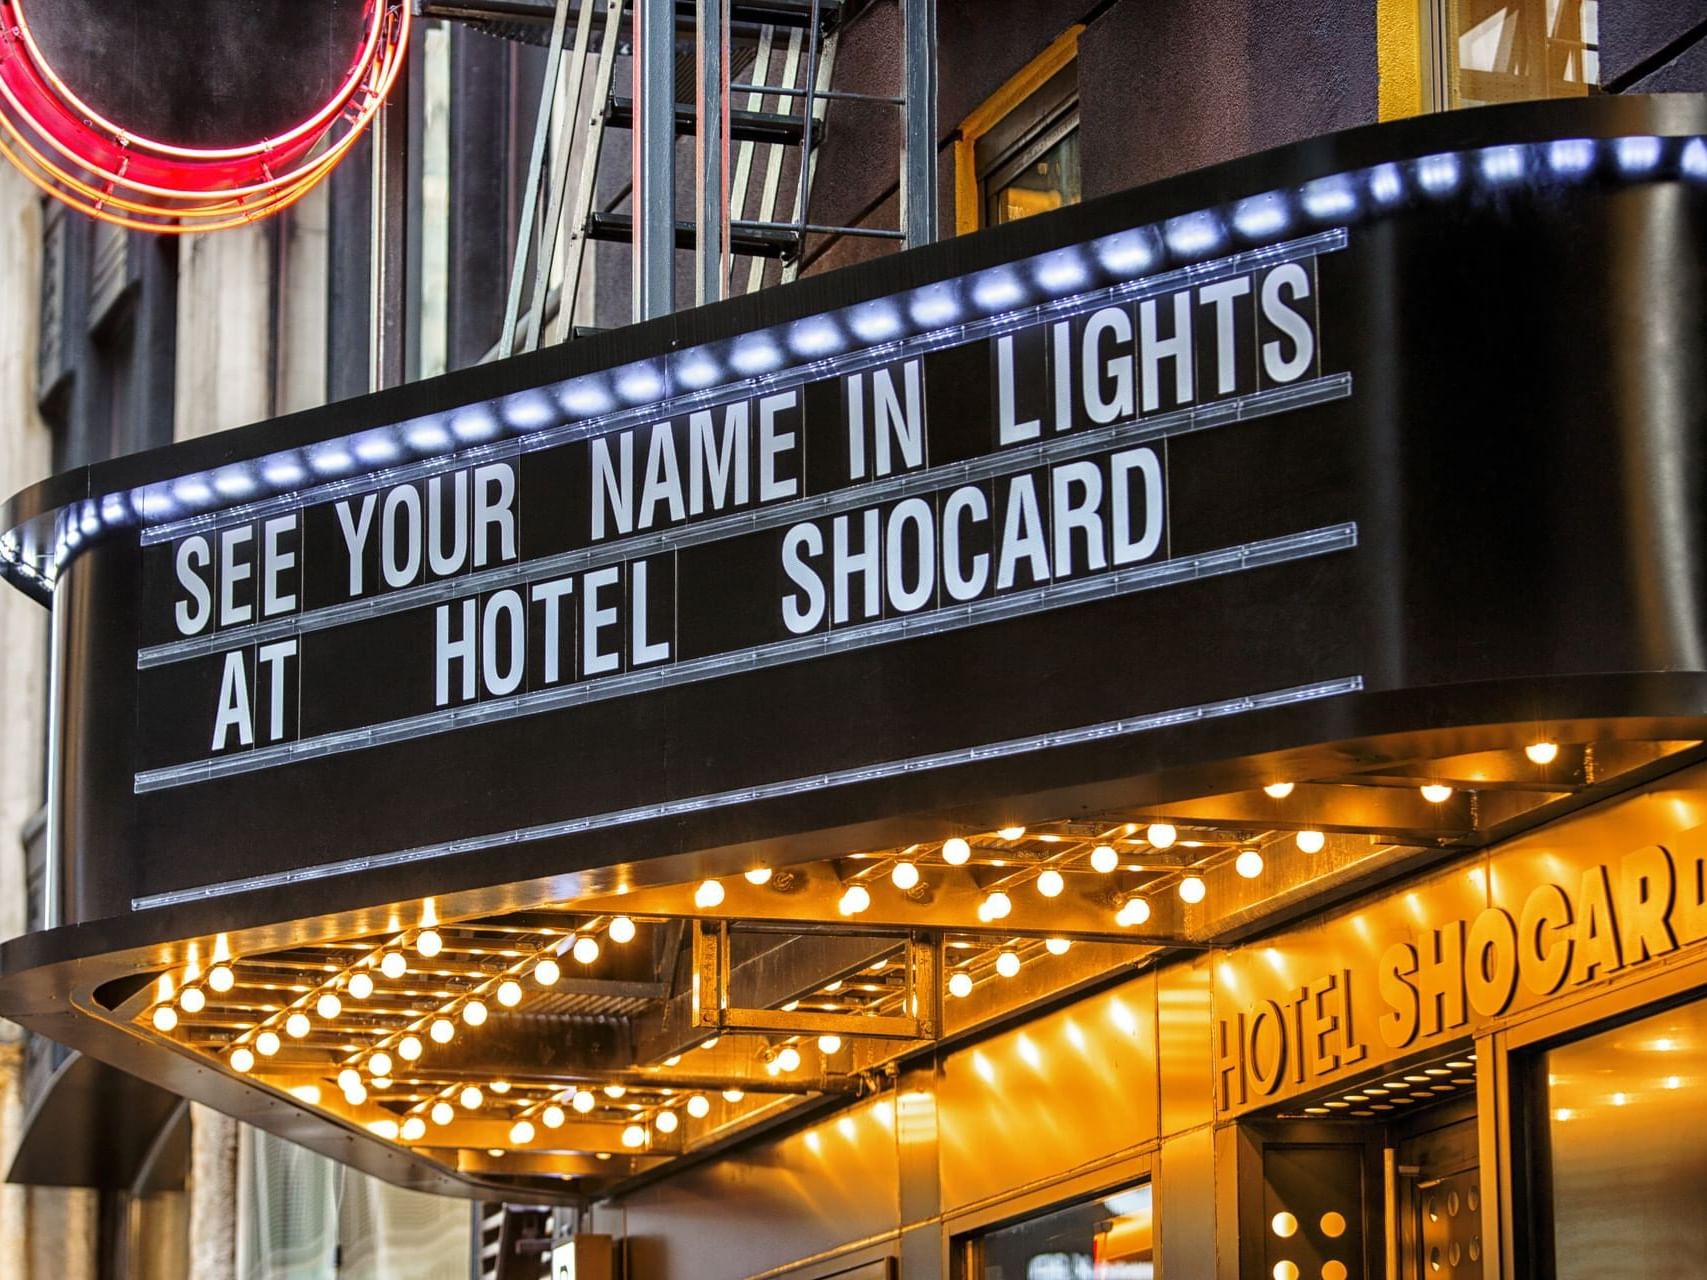 See Your Name in Lights on a digital board at Hotel Shocard